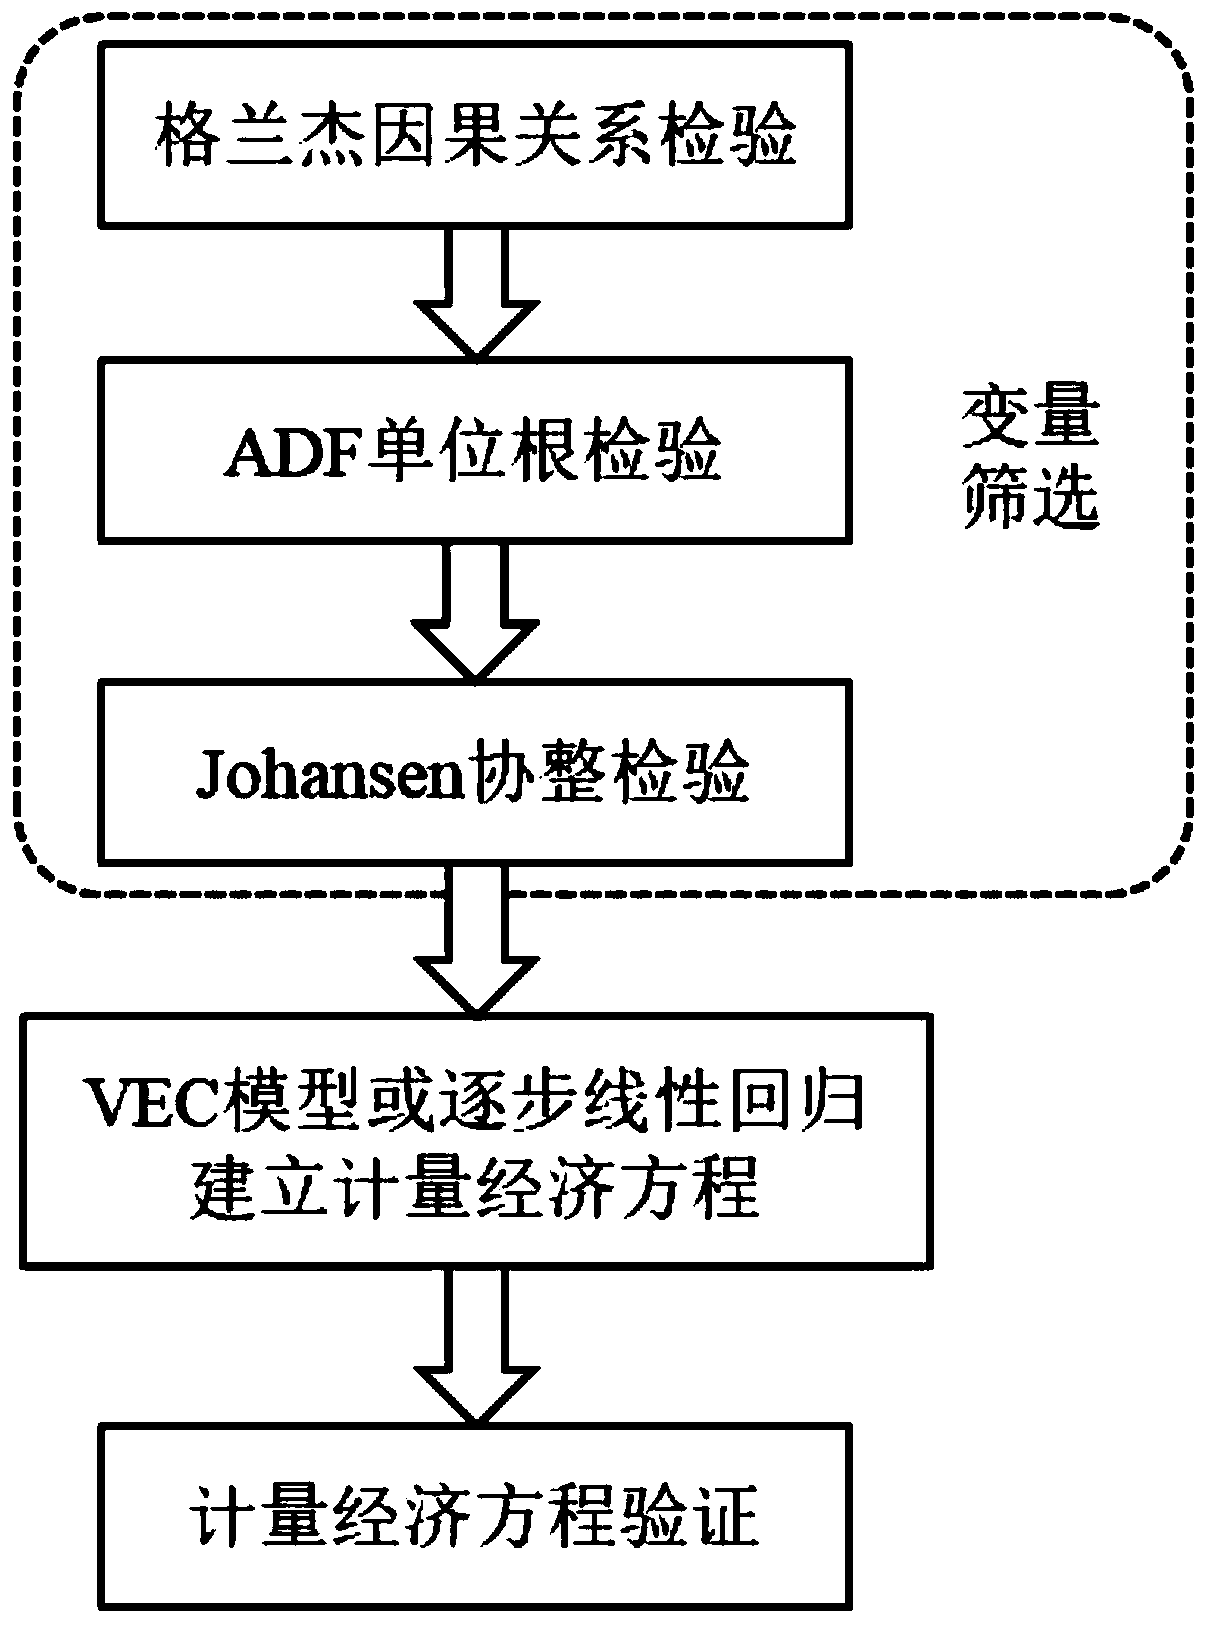 Saturated power demand prediction method considering urbanization development and electric energy substitution effect